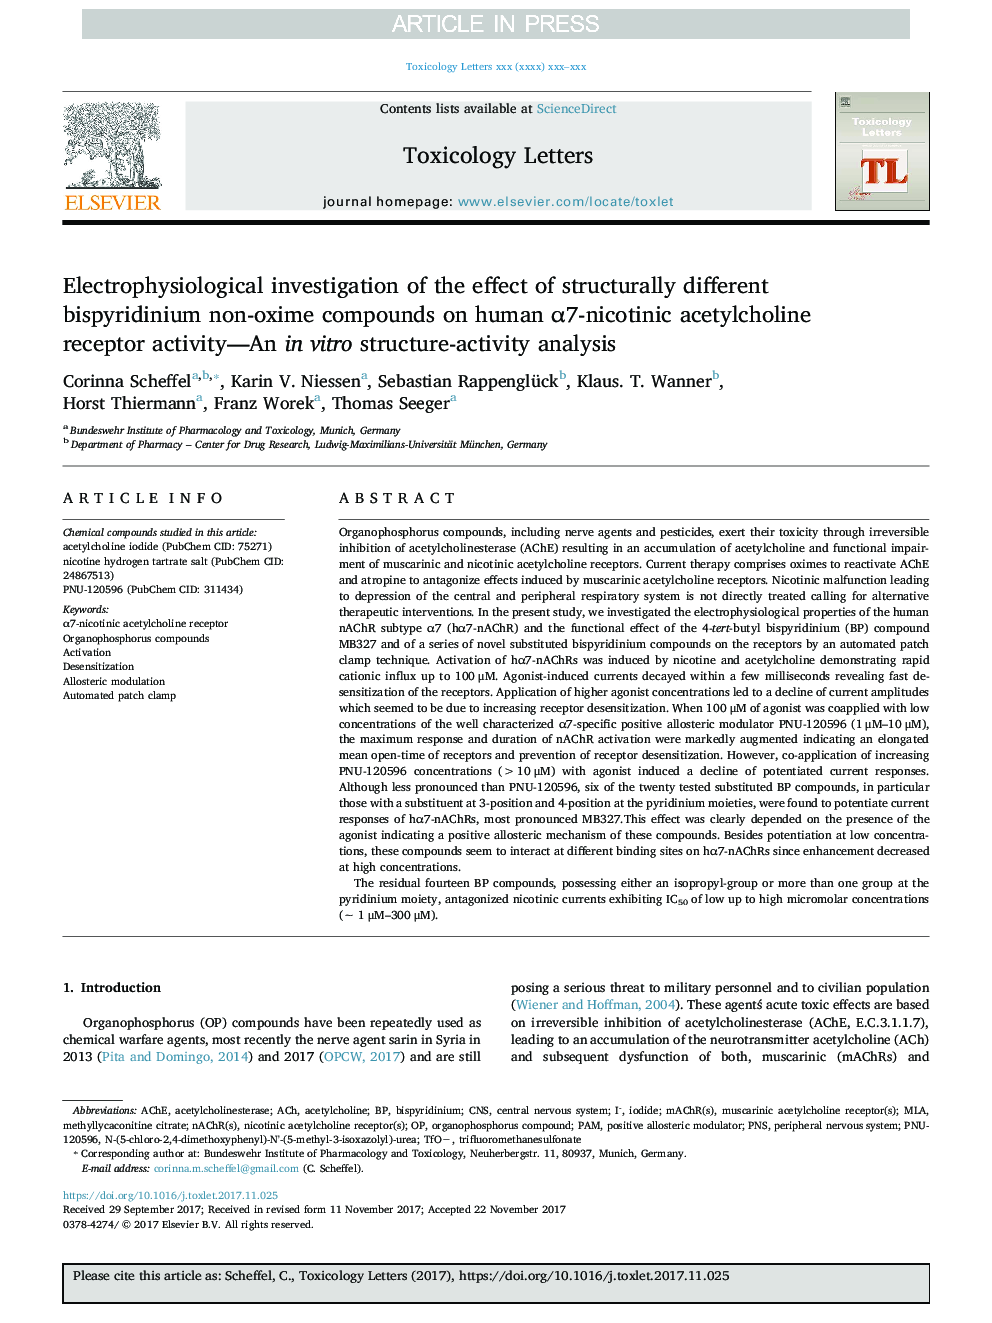 Electrophysiological investigation of the effect of structurally different bispyridinium non-oxime compounds on human Î±7-nicotinic acetylcholine receptor activity-An in vitro structure-activity analysis